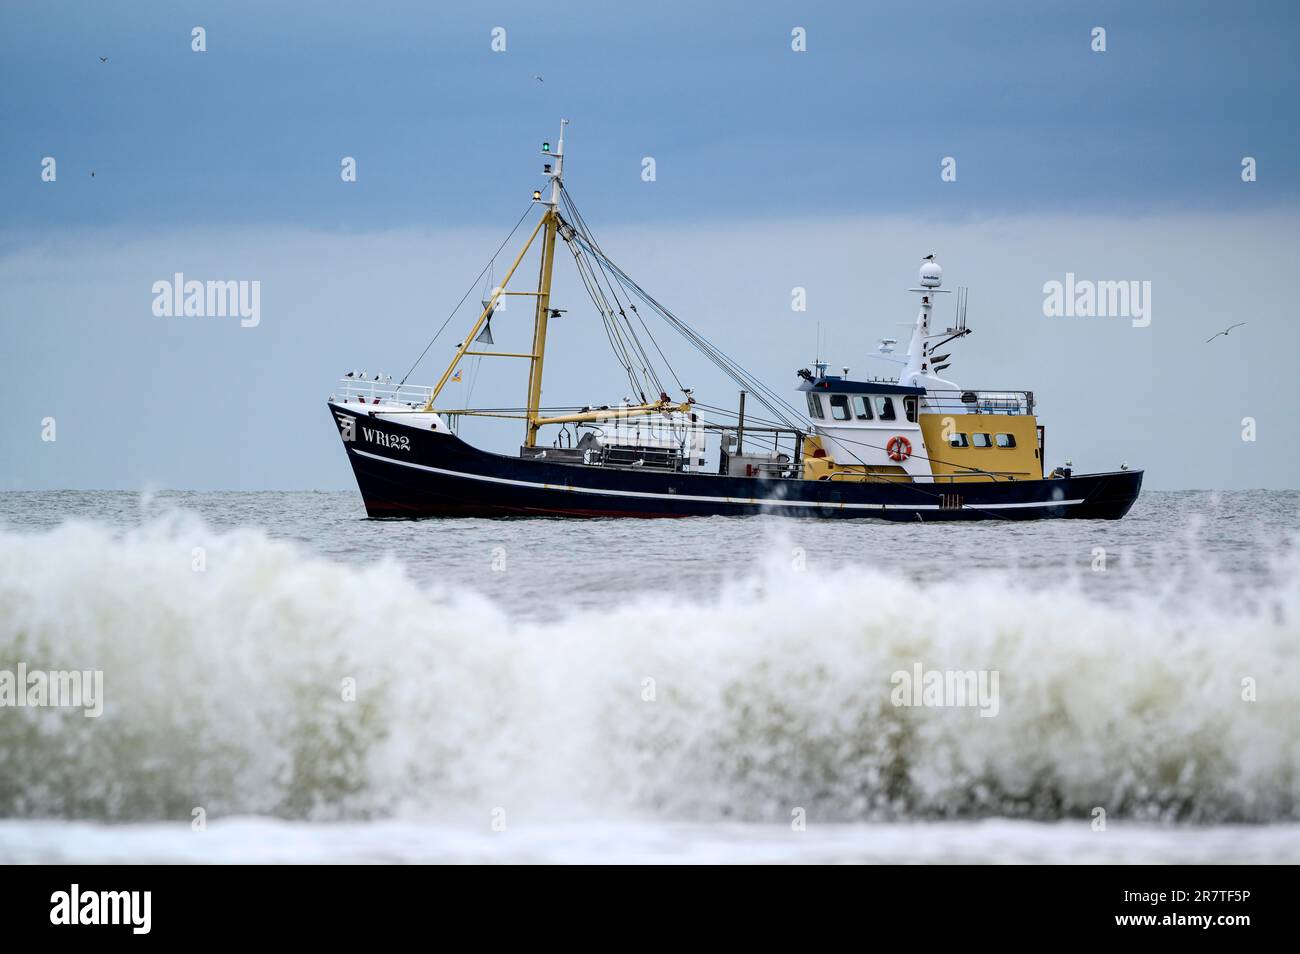 Shrimper, crabber near beach, with surf, Texel Island, North Sea, North Holland, Netherlands Stock Photo